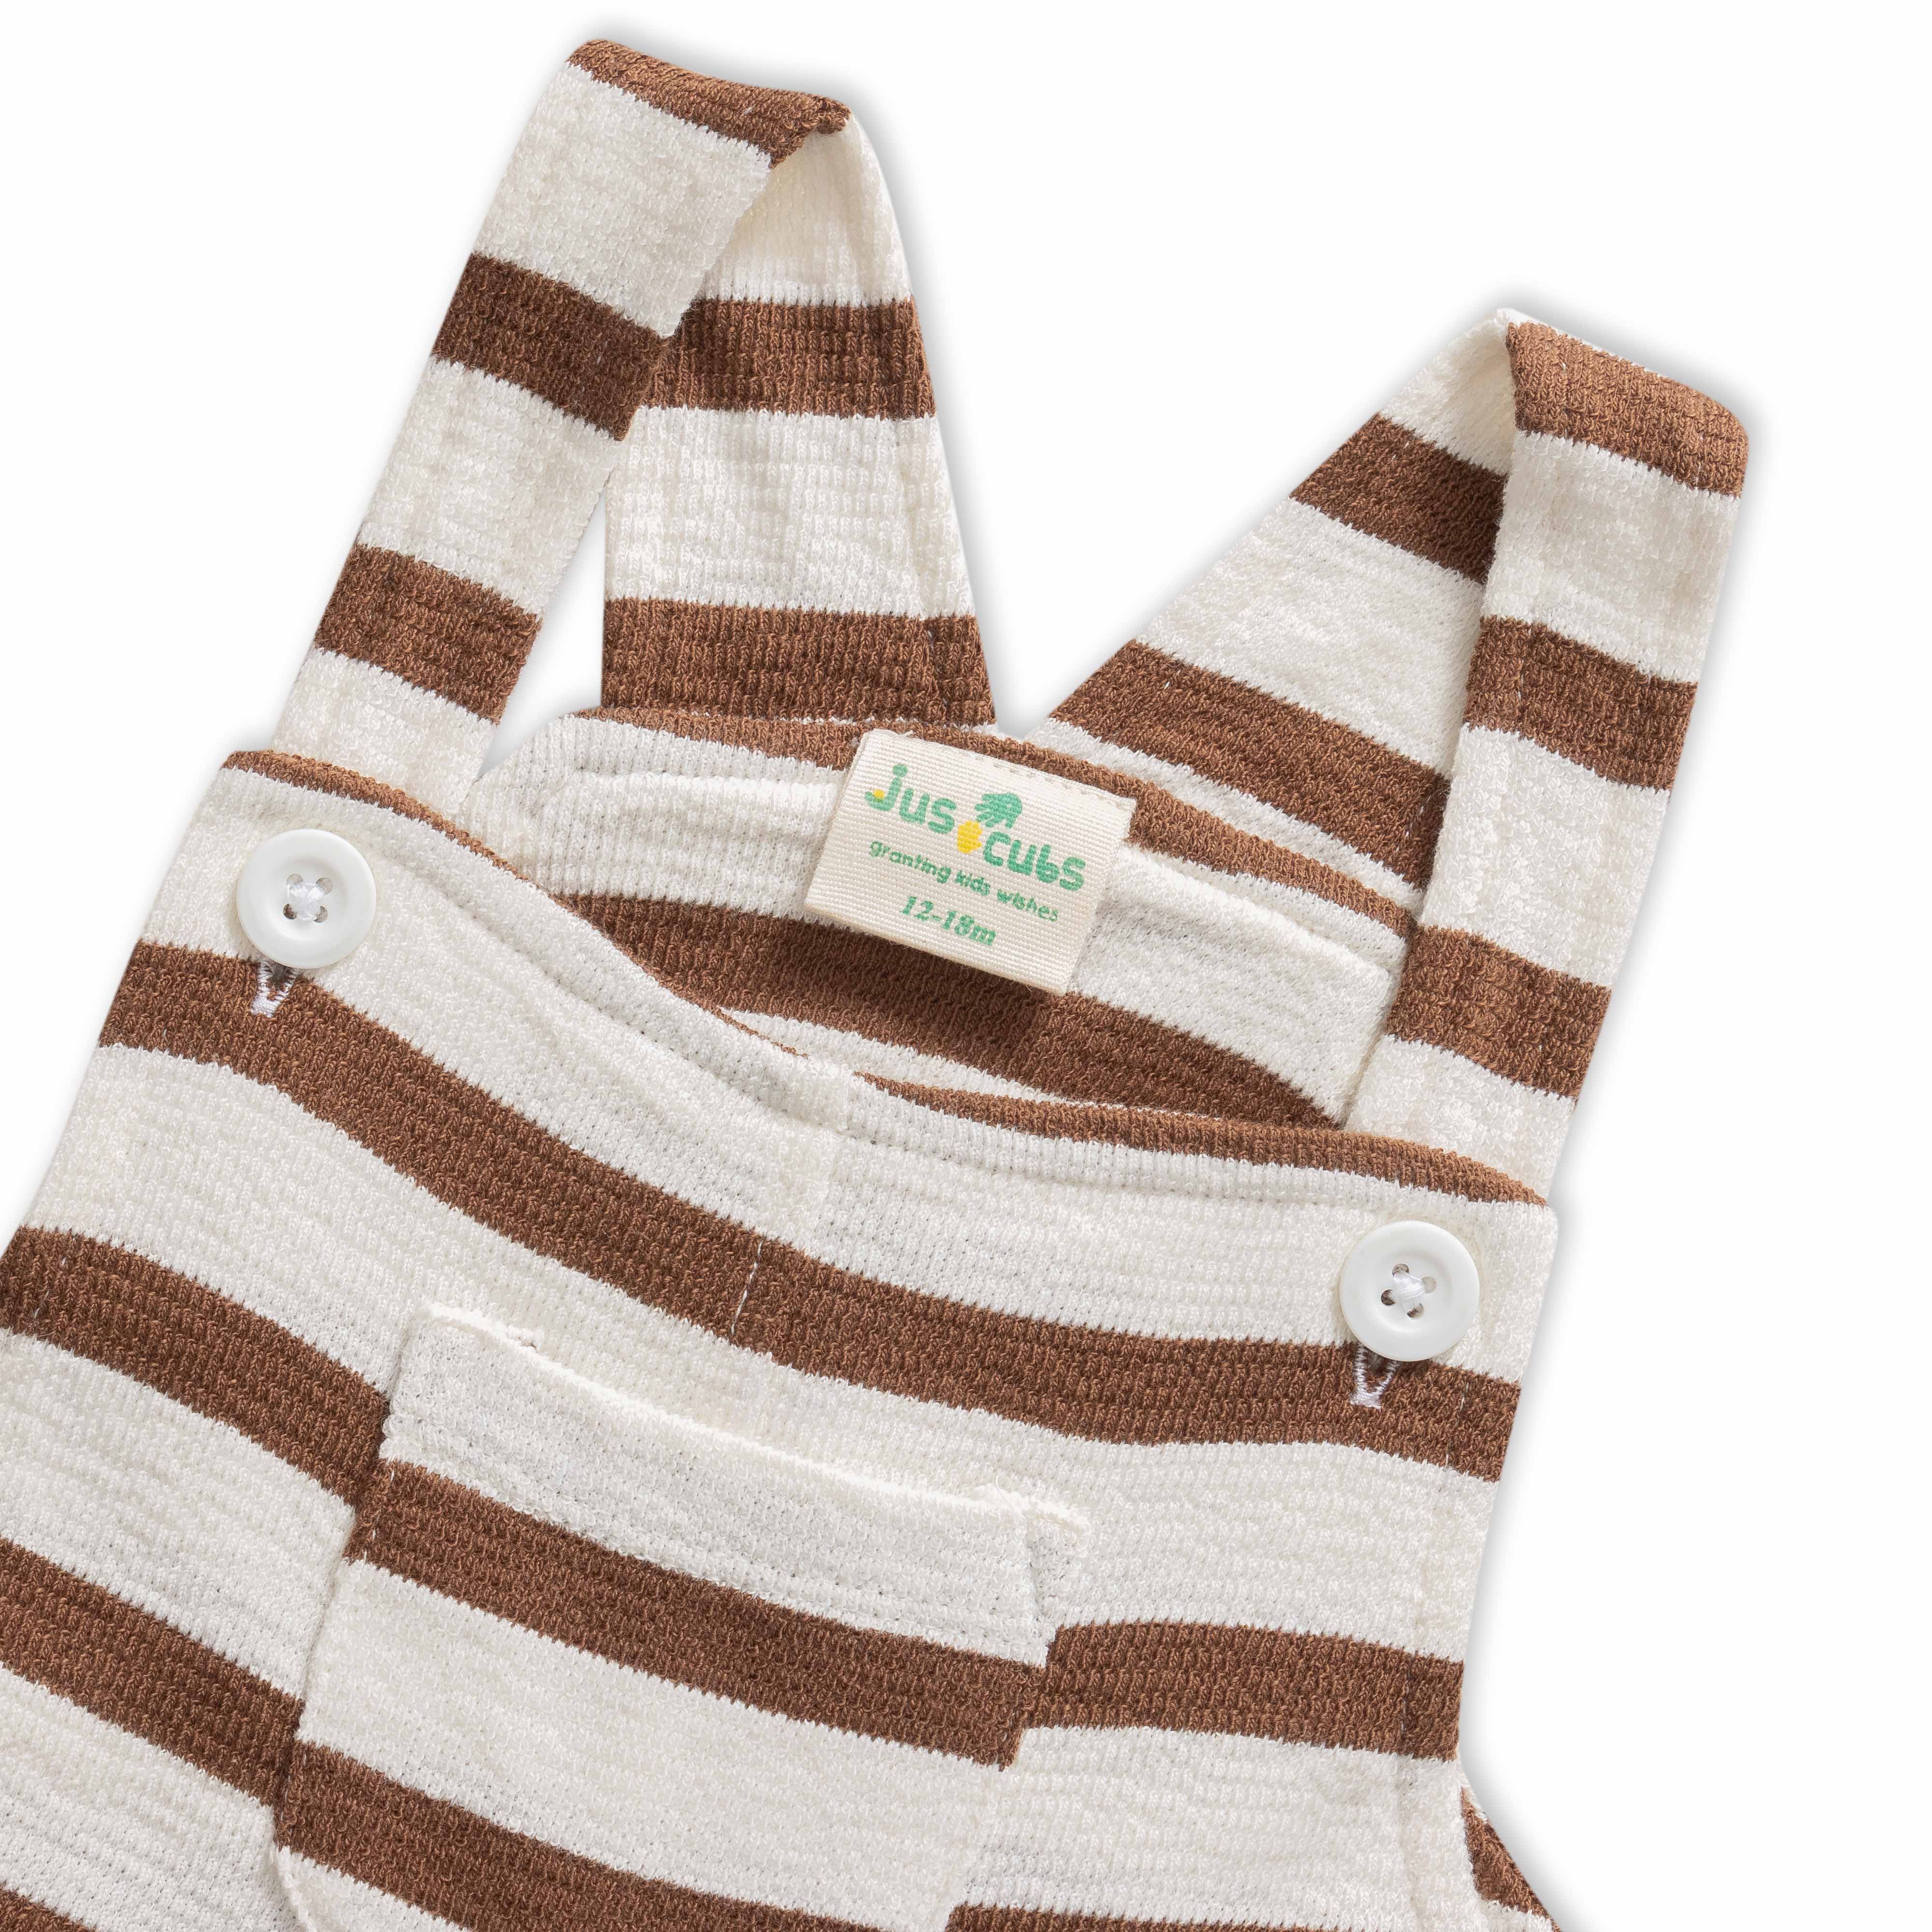 Baby Boys Striped Dungaree